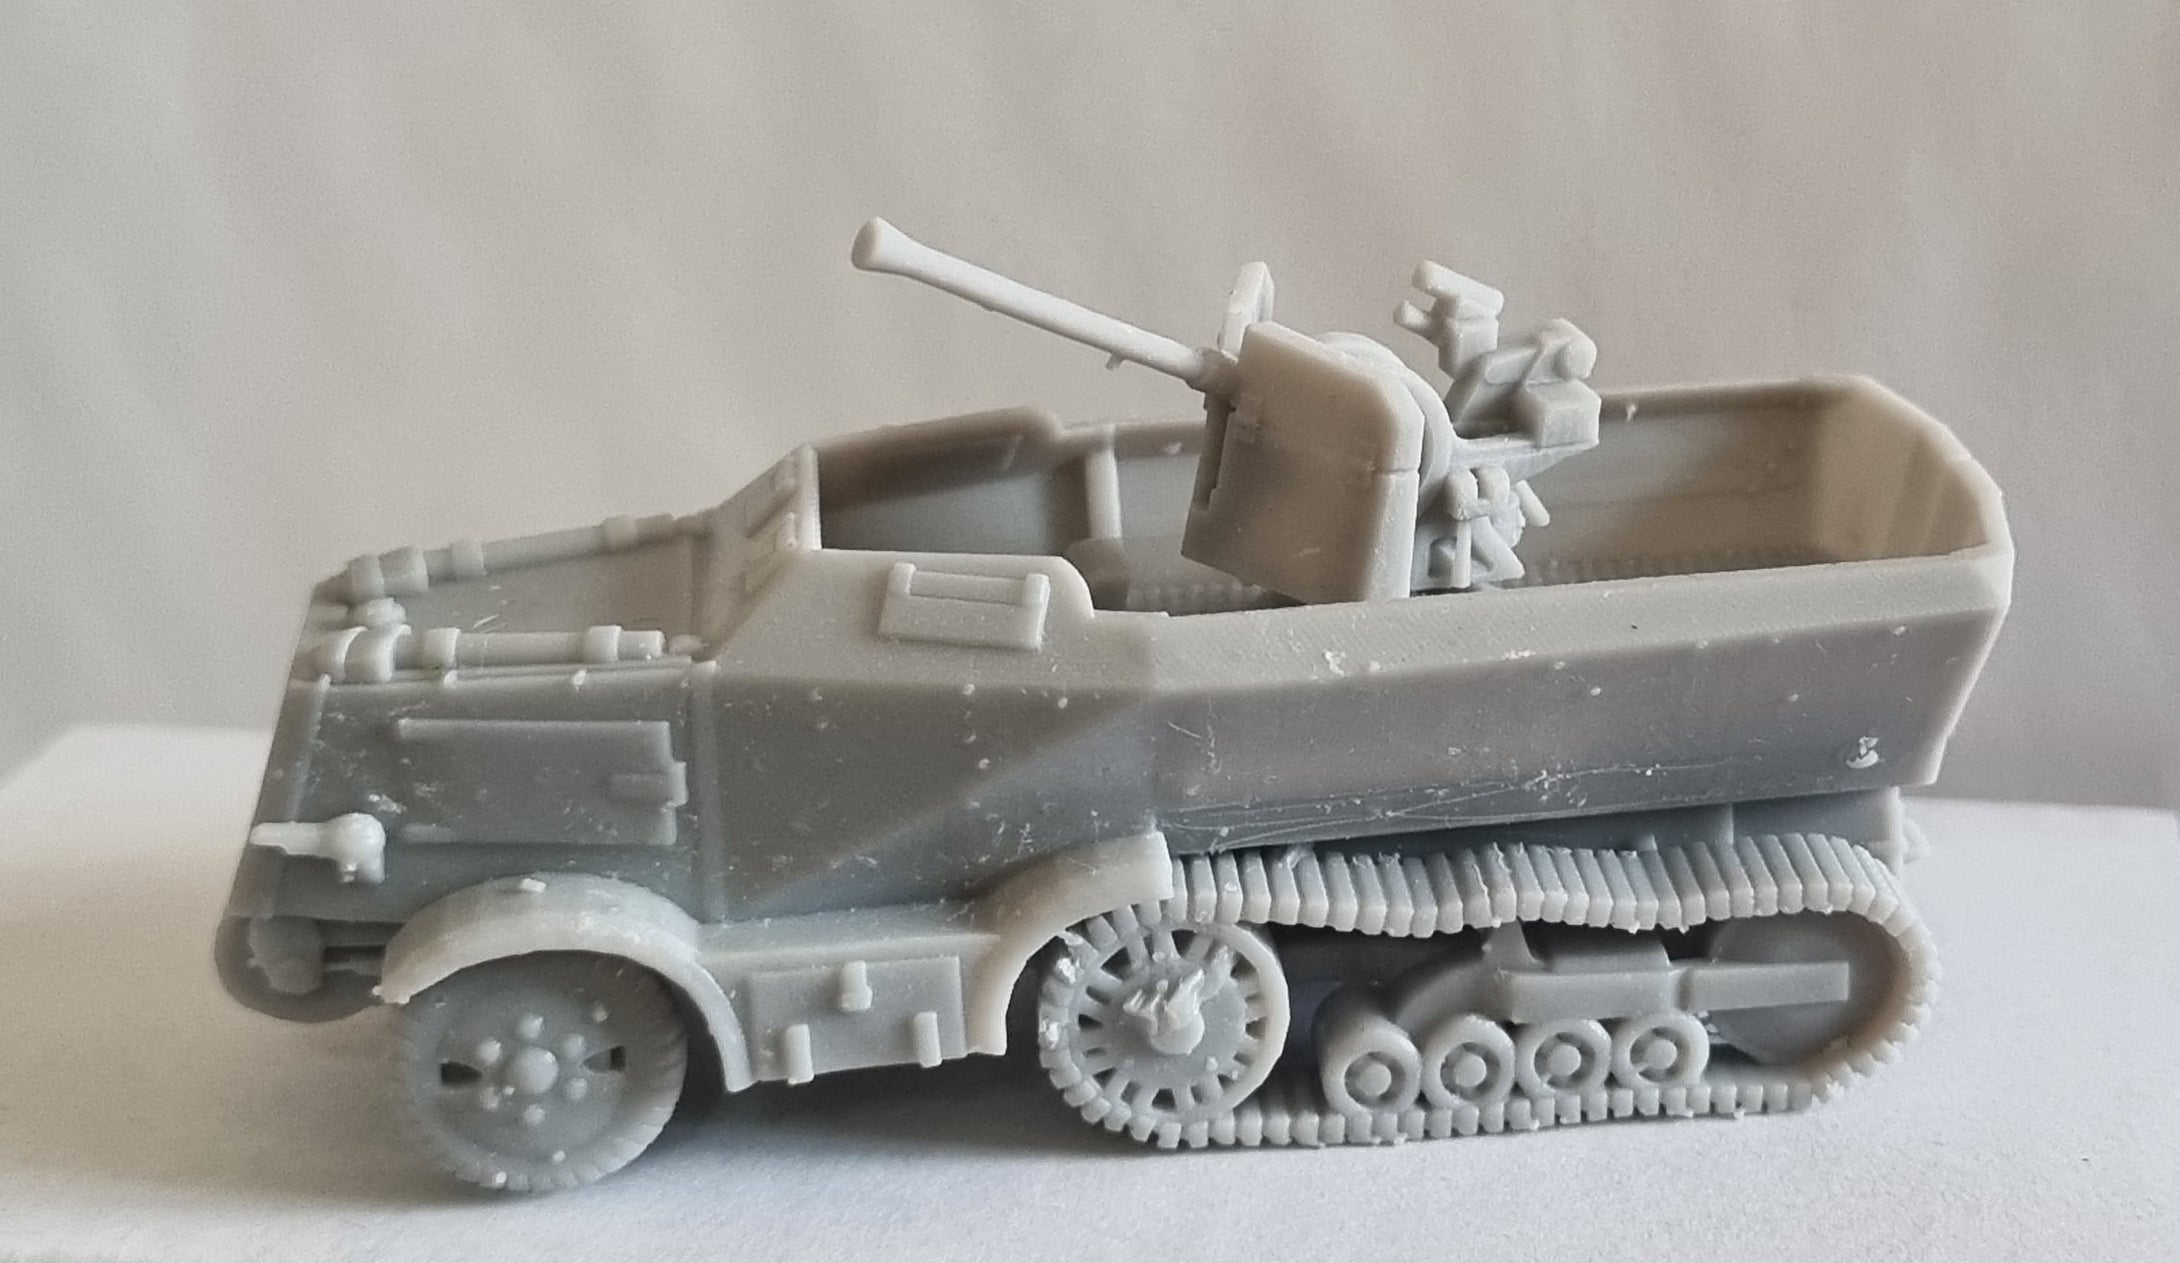 3D resin Printed Armoured Unic with 20mm AA